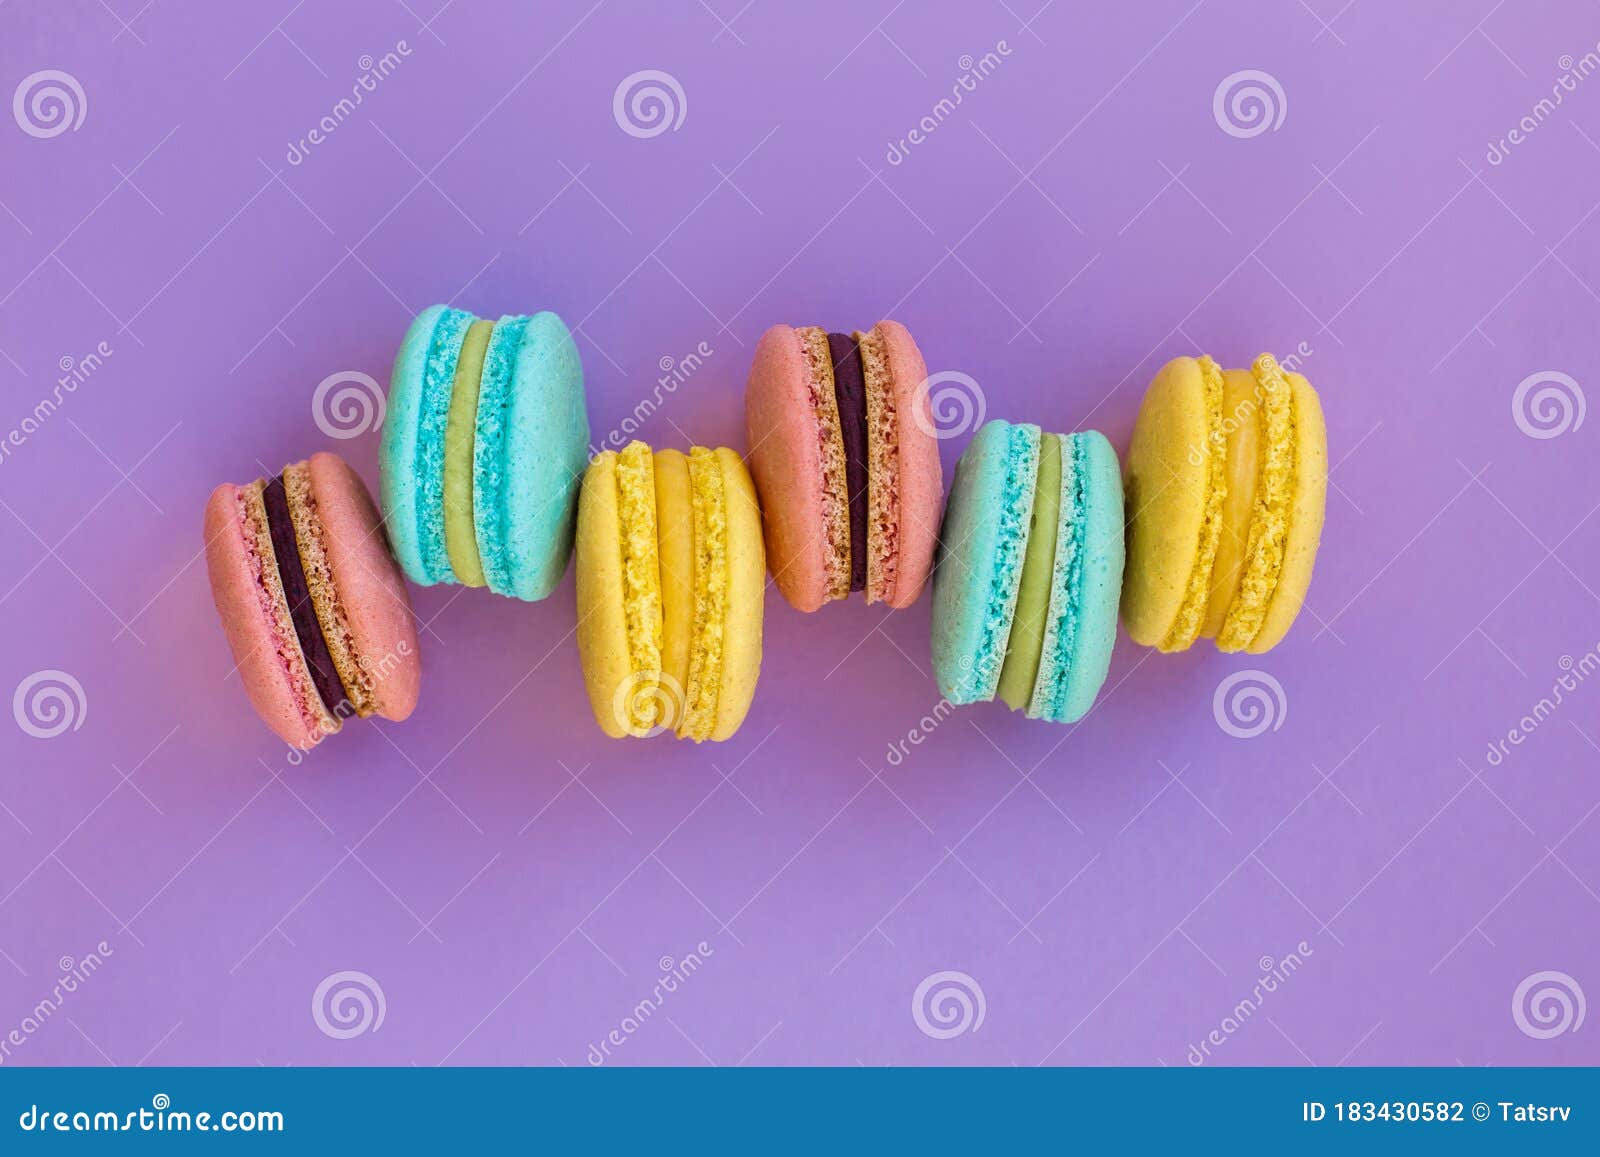 Sweet Colorful French Macaroon Biscuits on Violet Purple Background ...